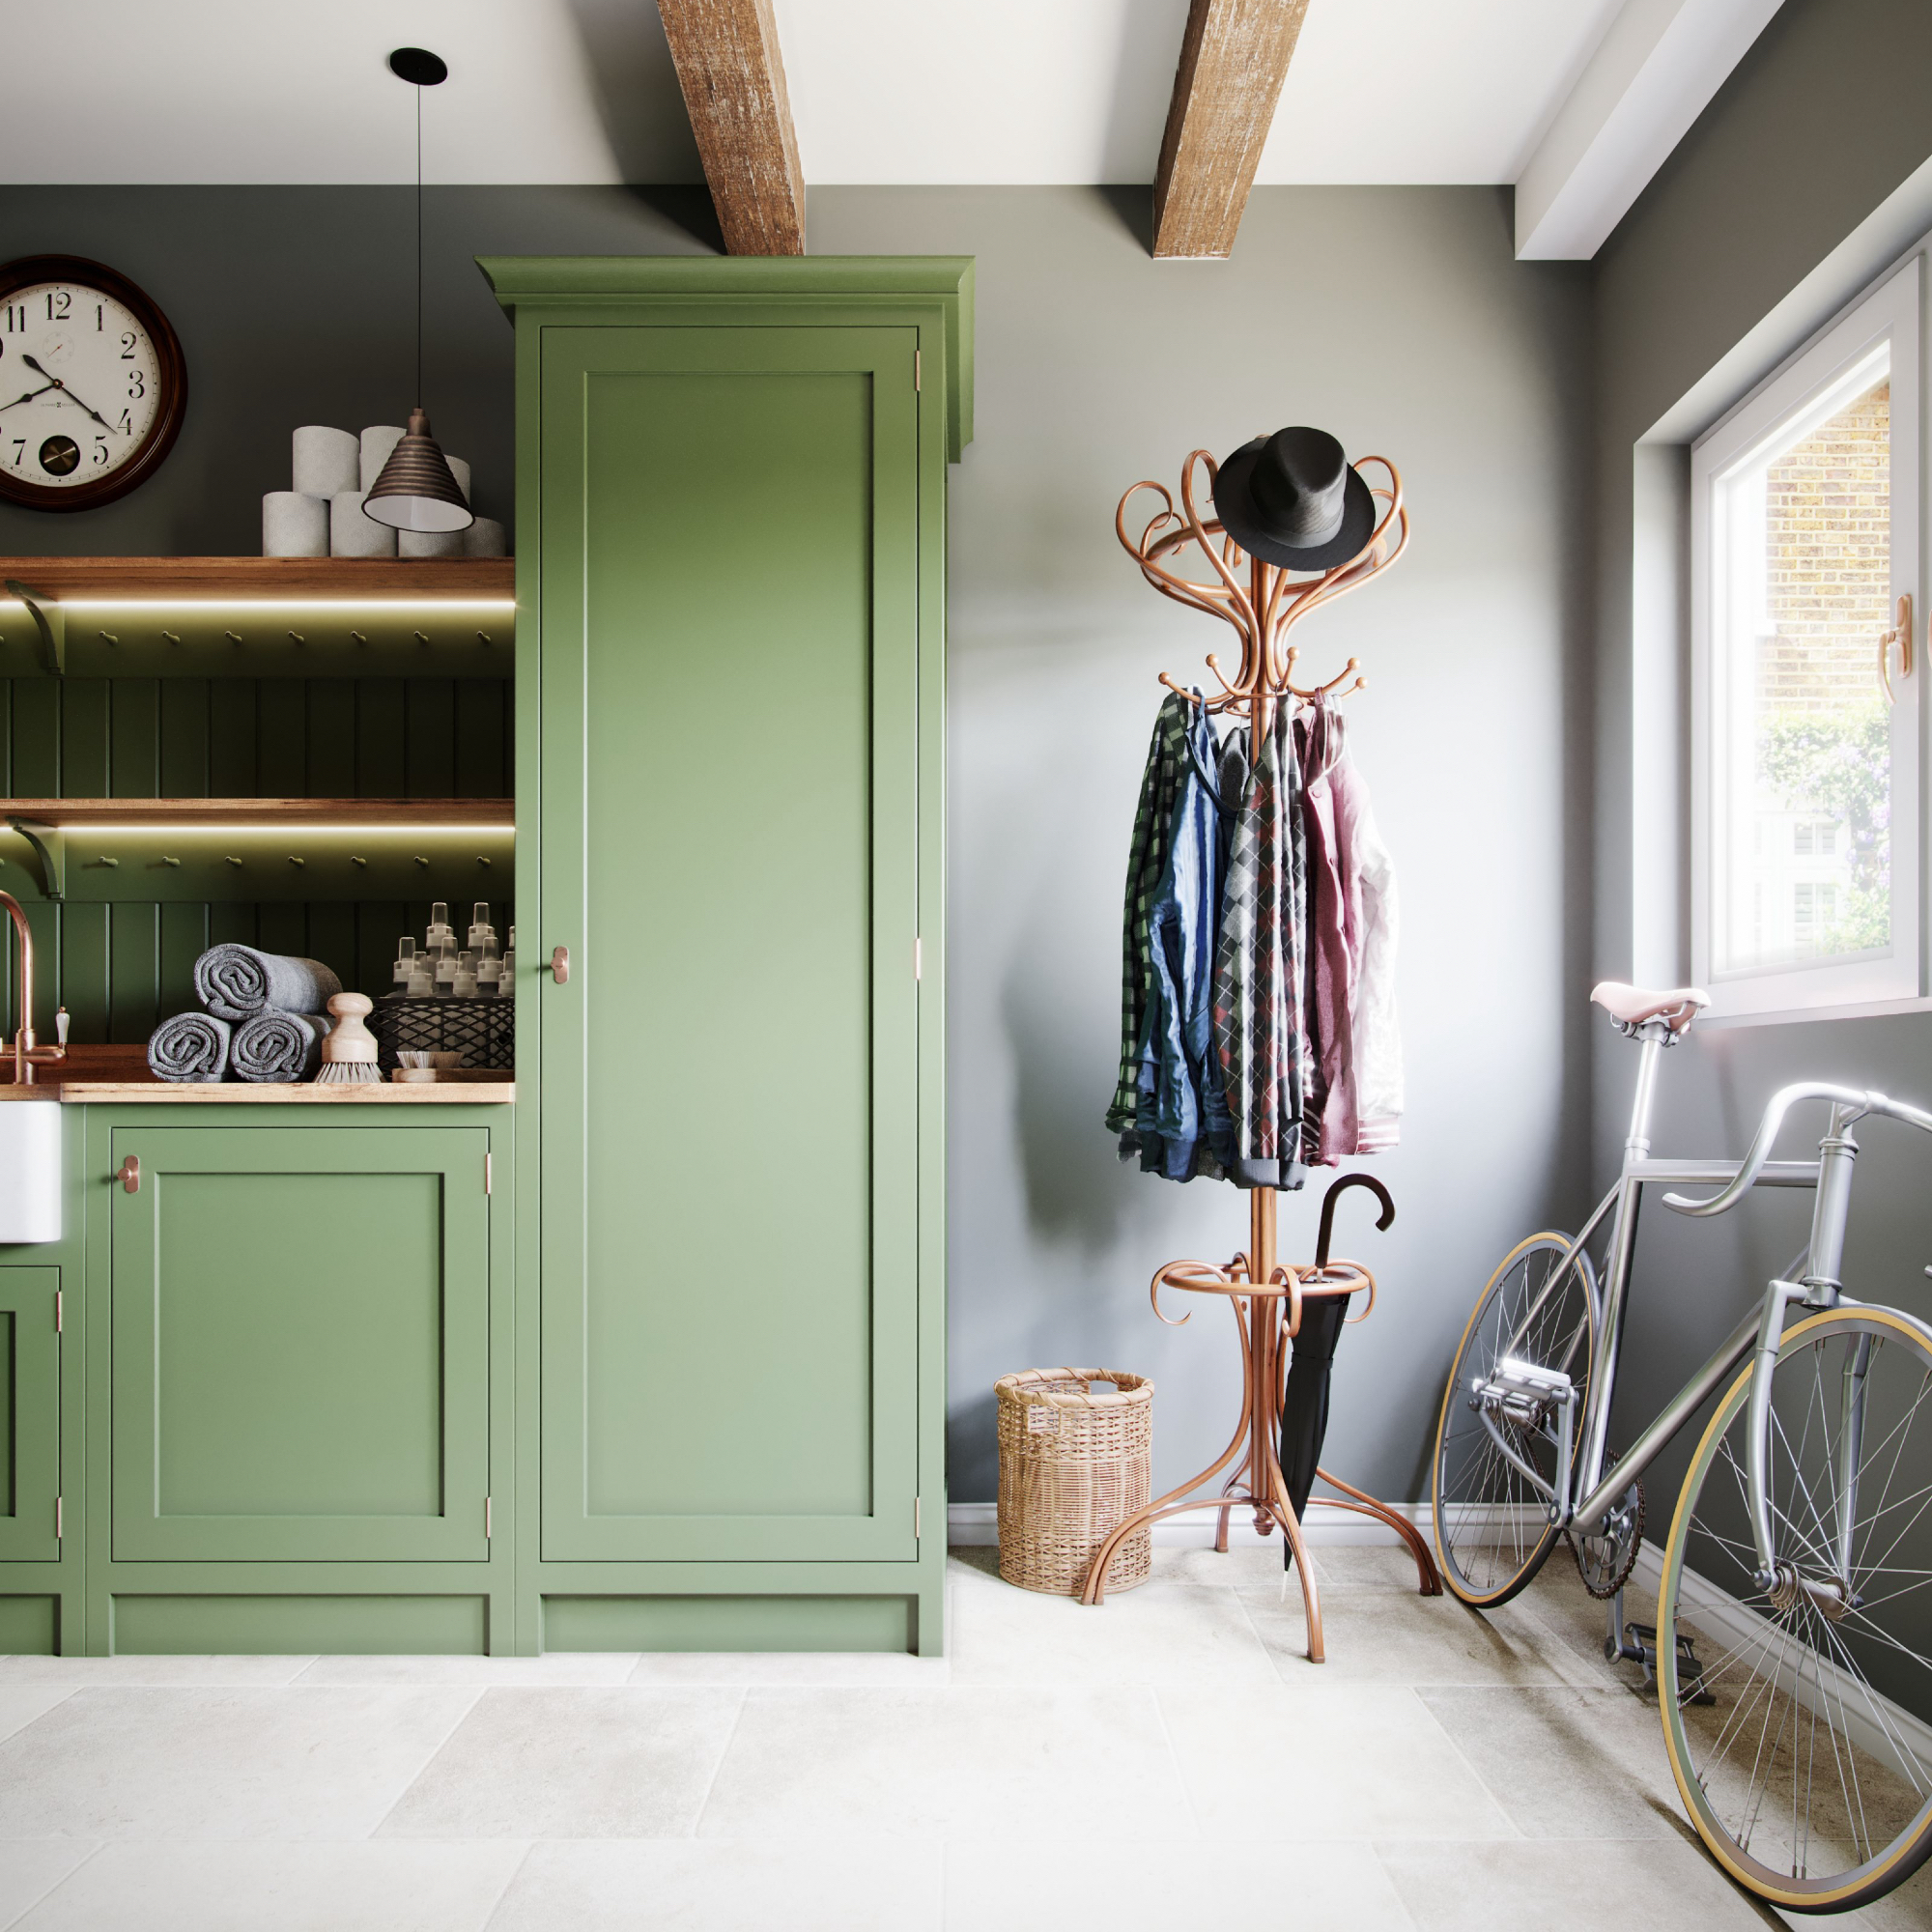 utility room colour ideas, green and grey utility room with bespoke cabinets white tiled floor, coat stand, bike